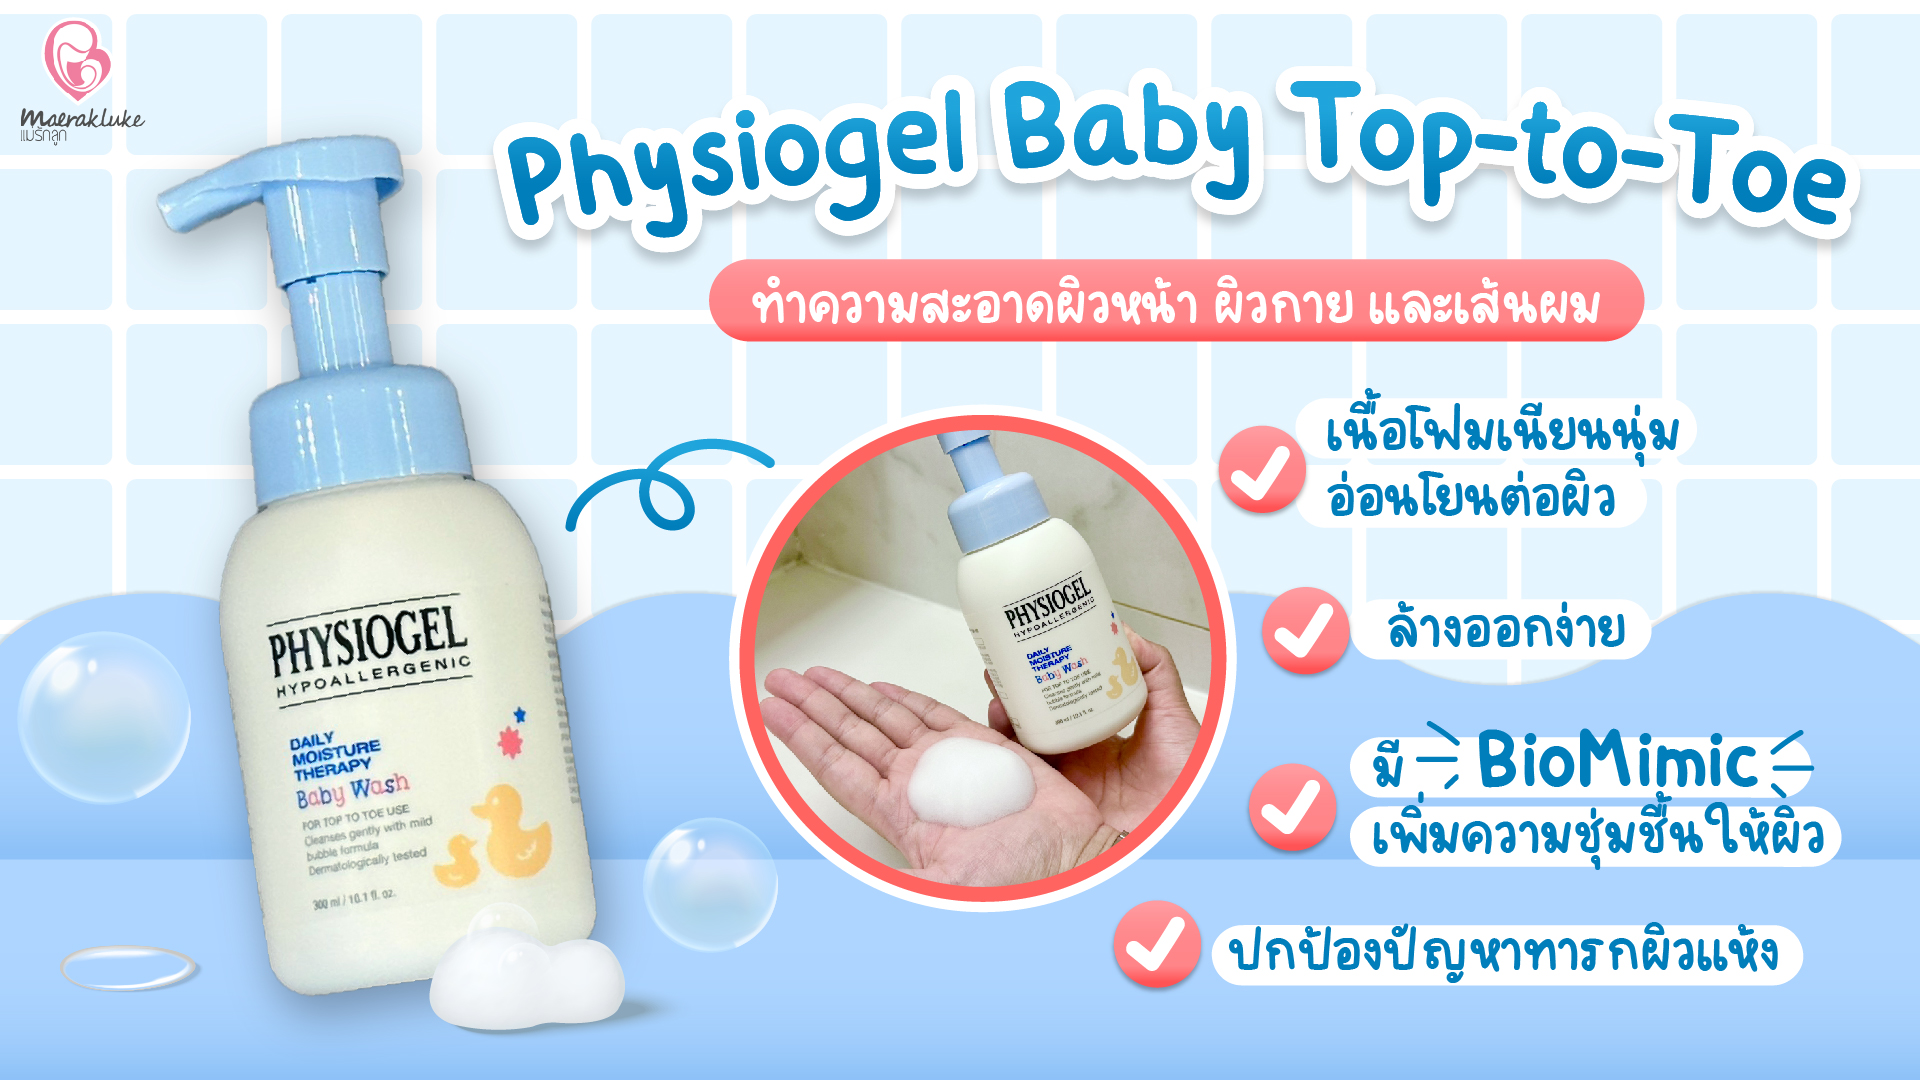 Physiogel Baby Top-To-Toe